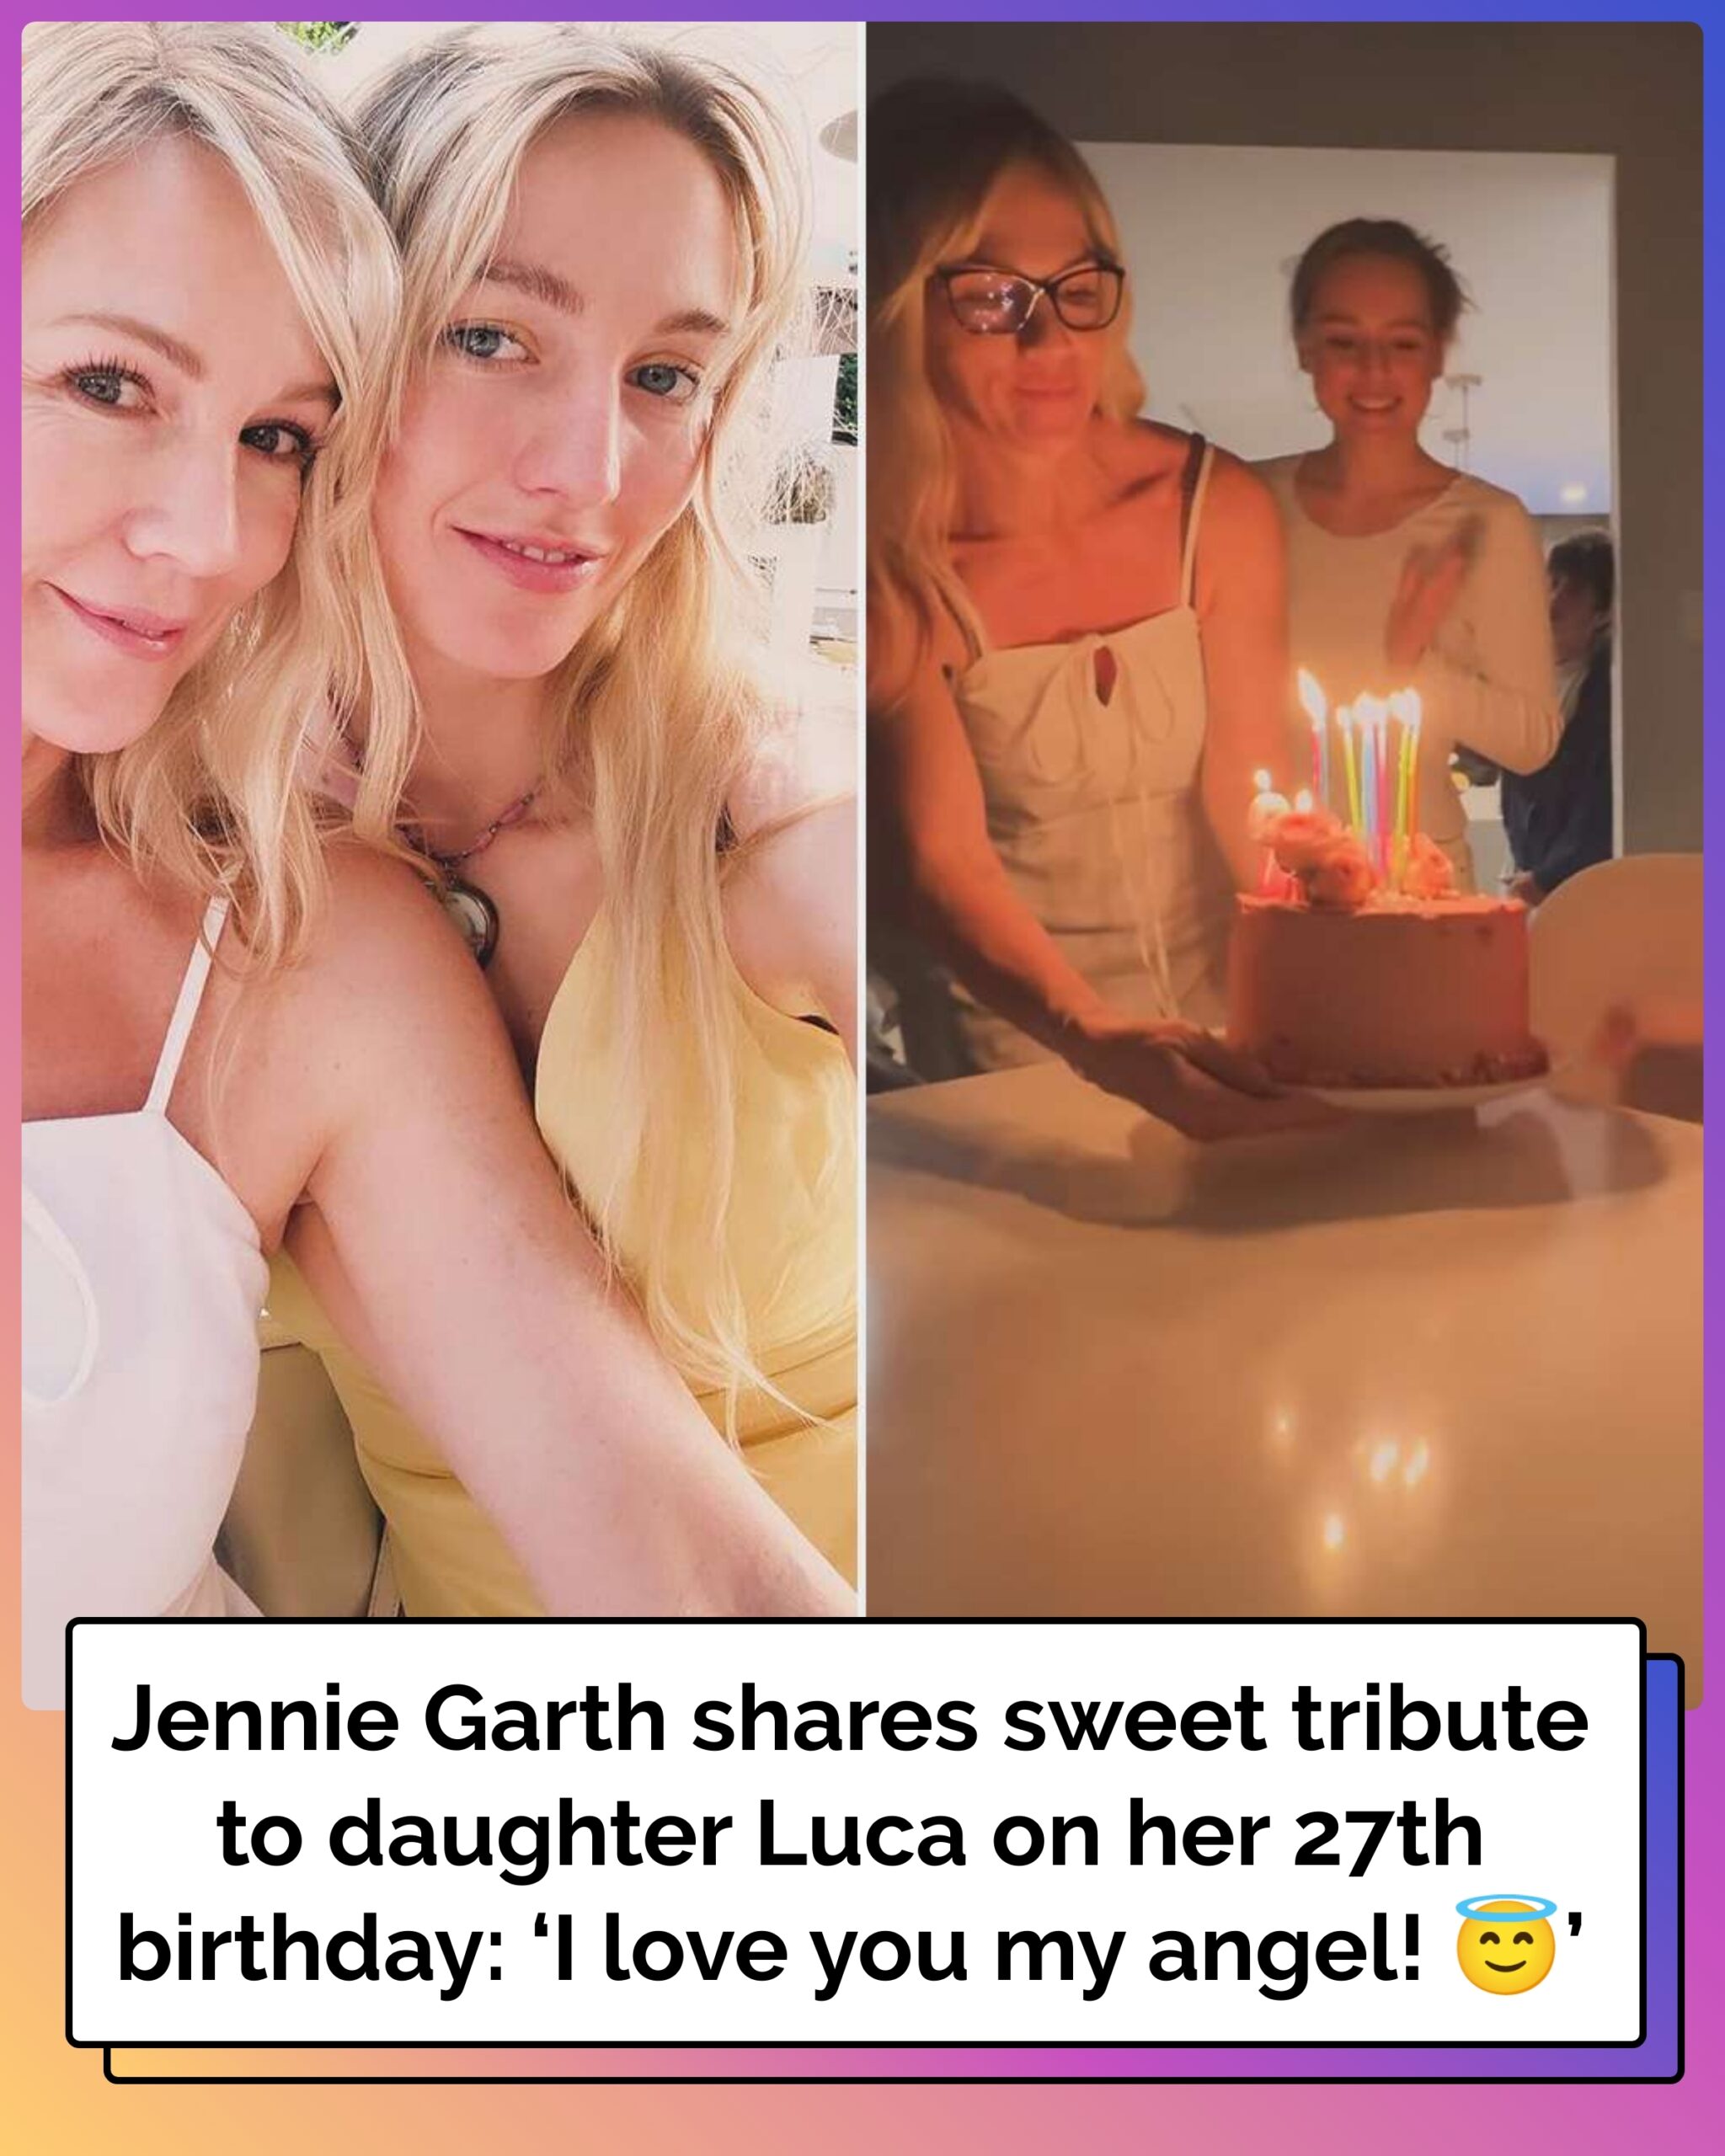 Jennie Garth Shares Sweet Tribute to Daughter Luca on Her 27th Birthday: ‘I Love You My Angel’